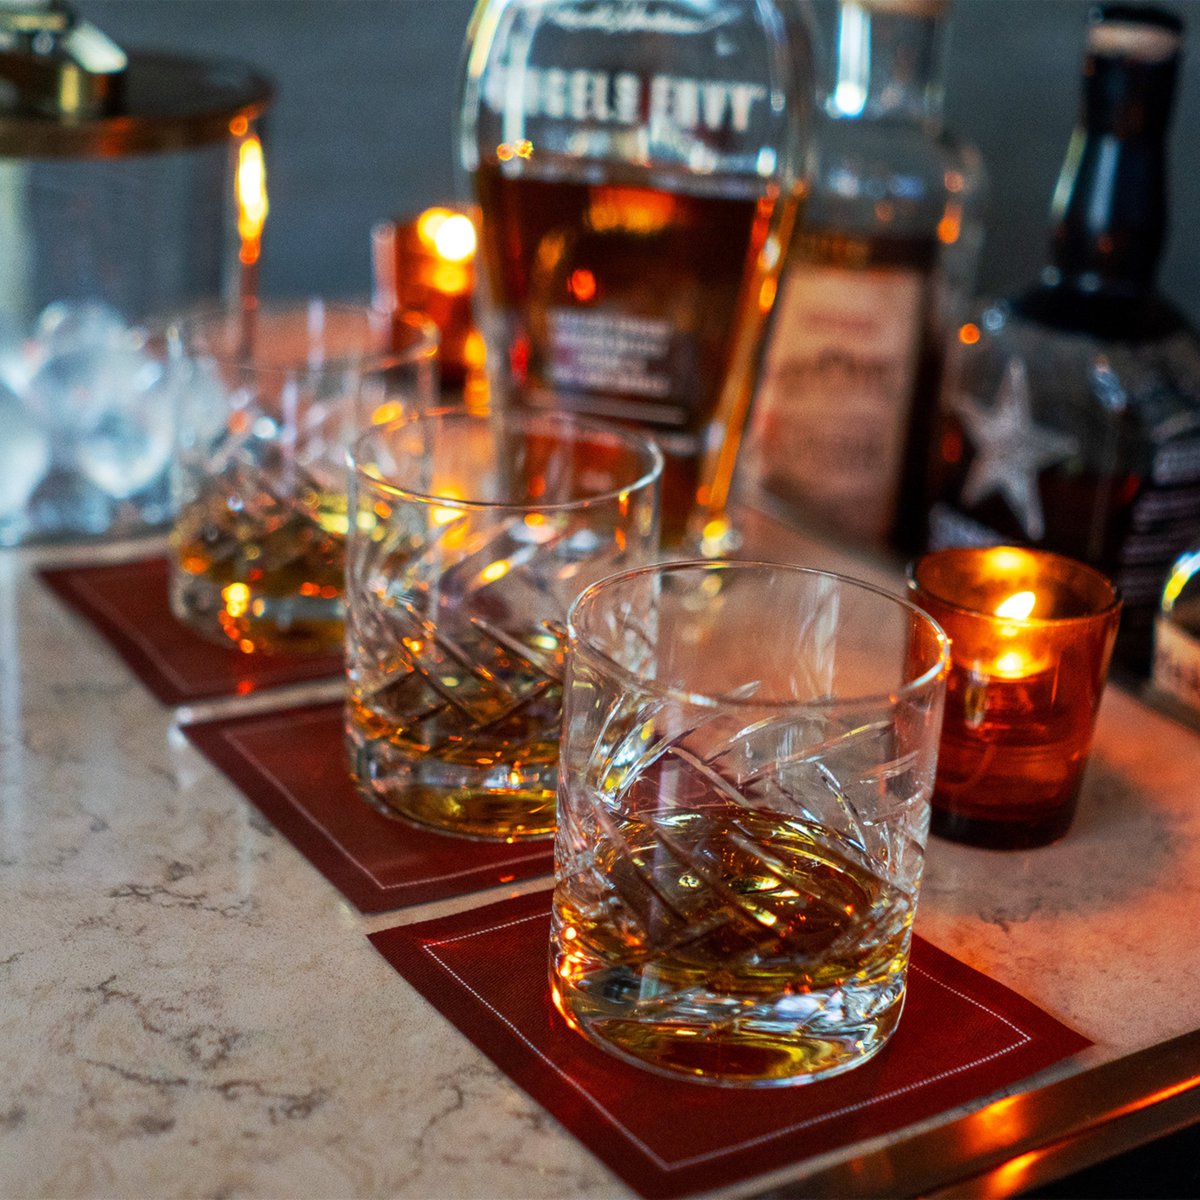 Get into the spirit this #BourbonHeritageMonth at Bourbon Steak! Enjoy traditional and reserve flights poured tableside from our beverage trolley, or try a specialty Bourbon cocktail paired with some of our most extravagant dishes.  Reserve your table: rb.gy/136eg